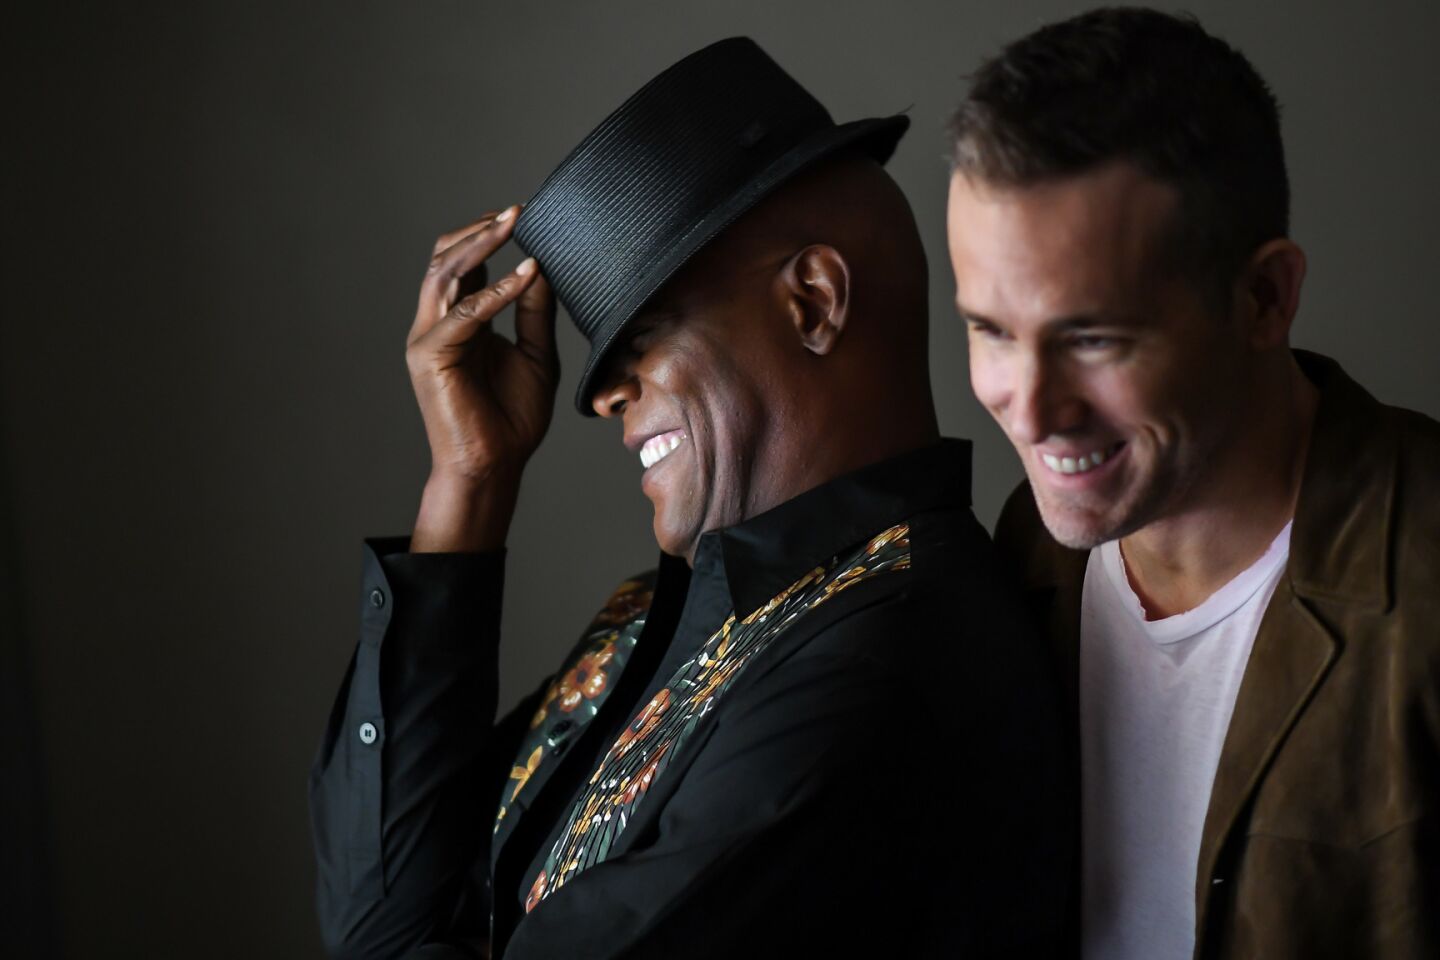 Celebrity portraits by The Times | Samuel L. Jackson and Ryan Reynolds